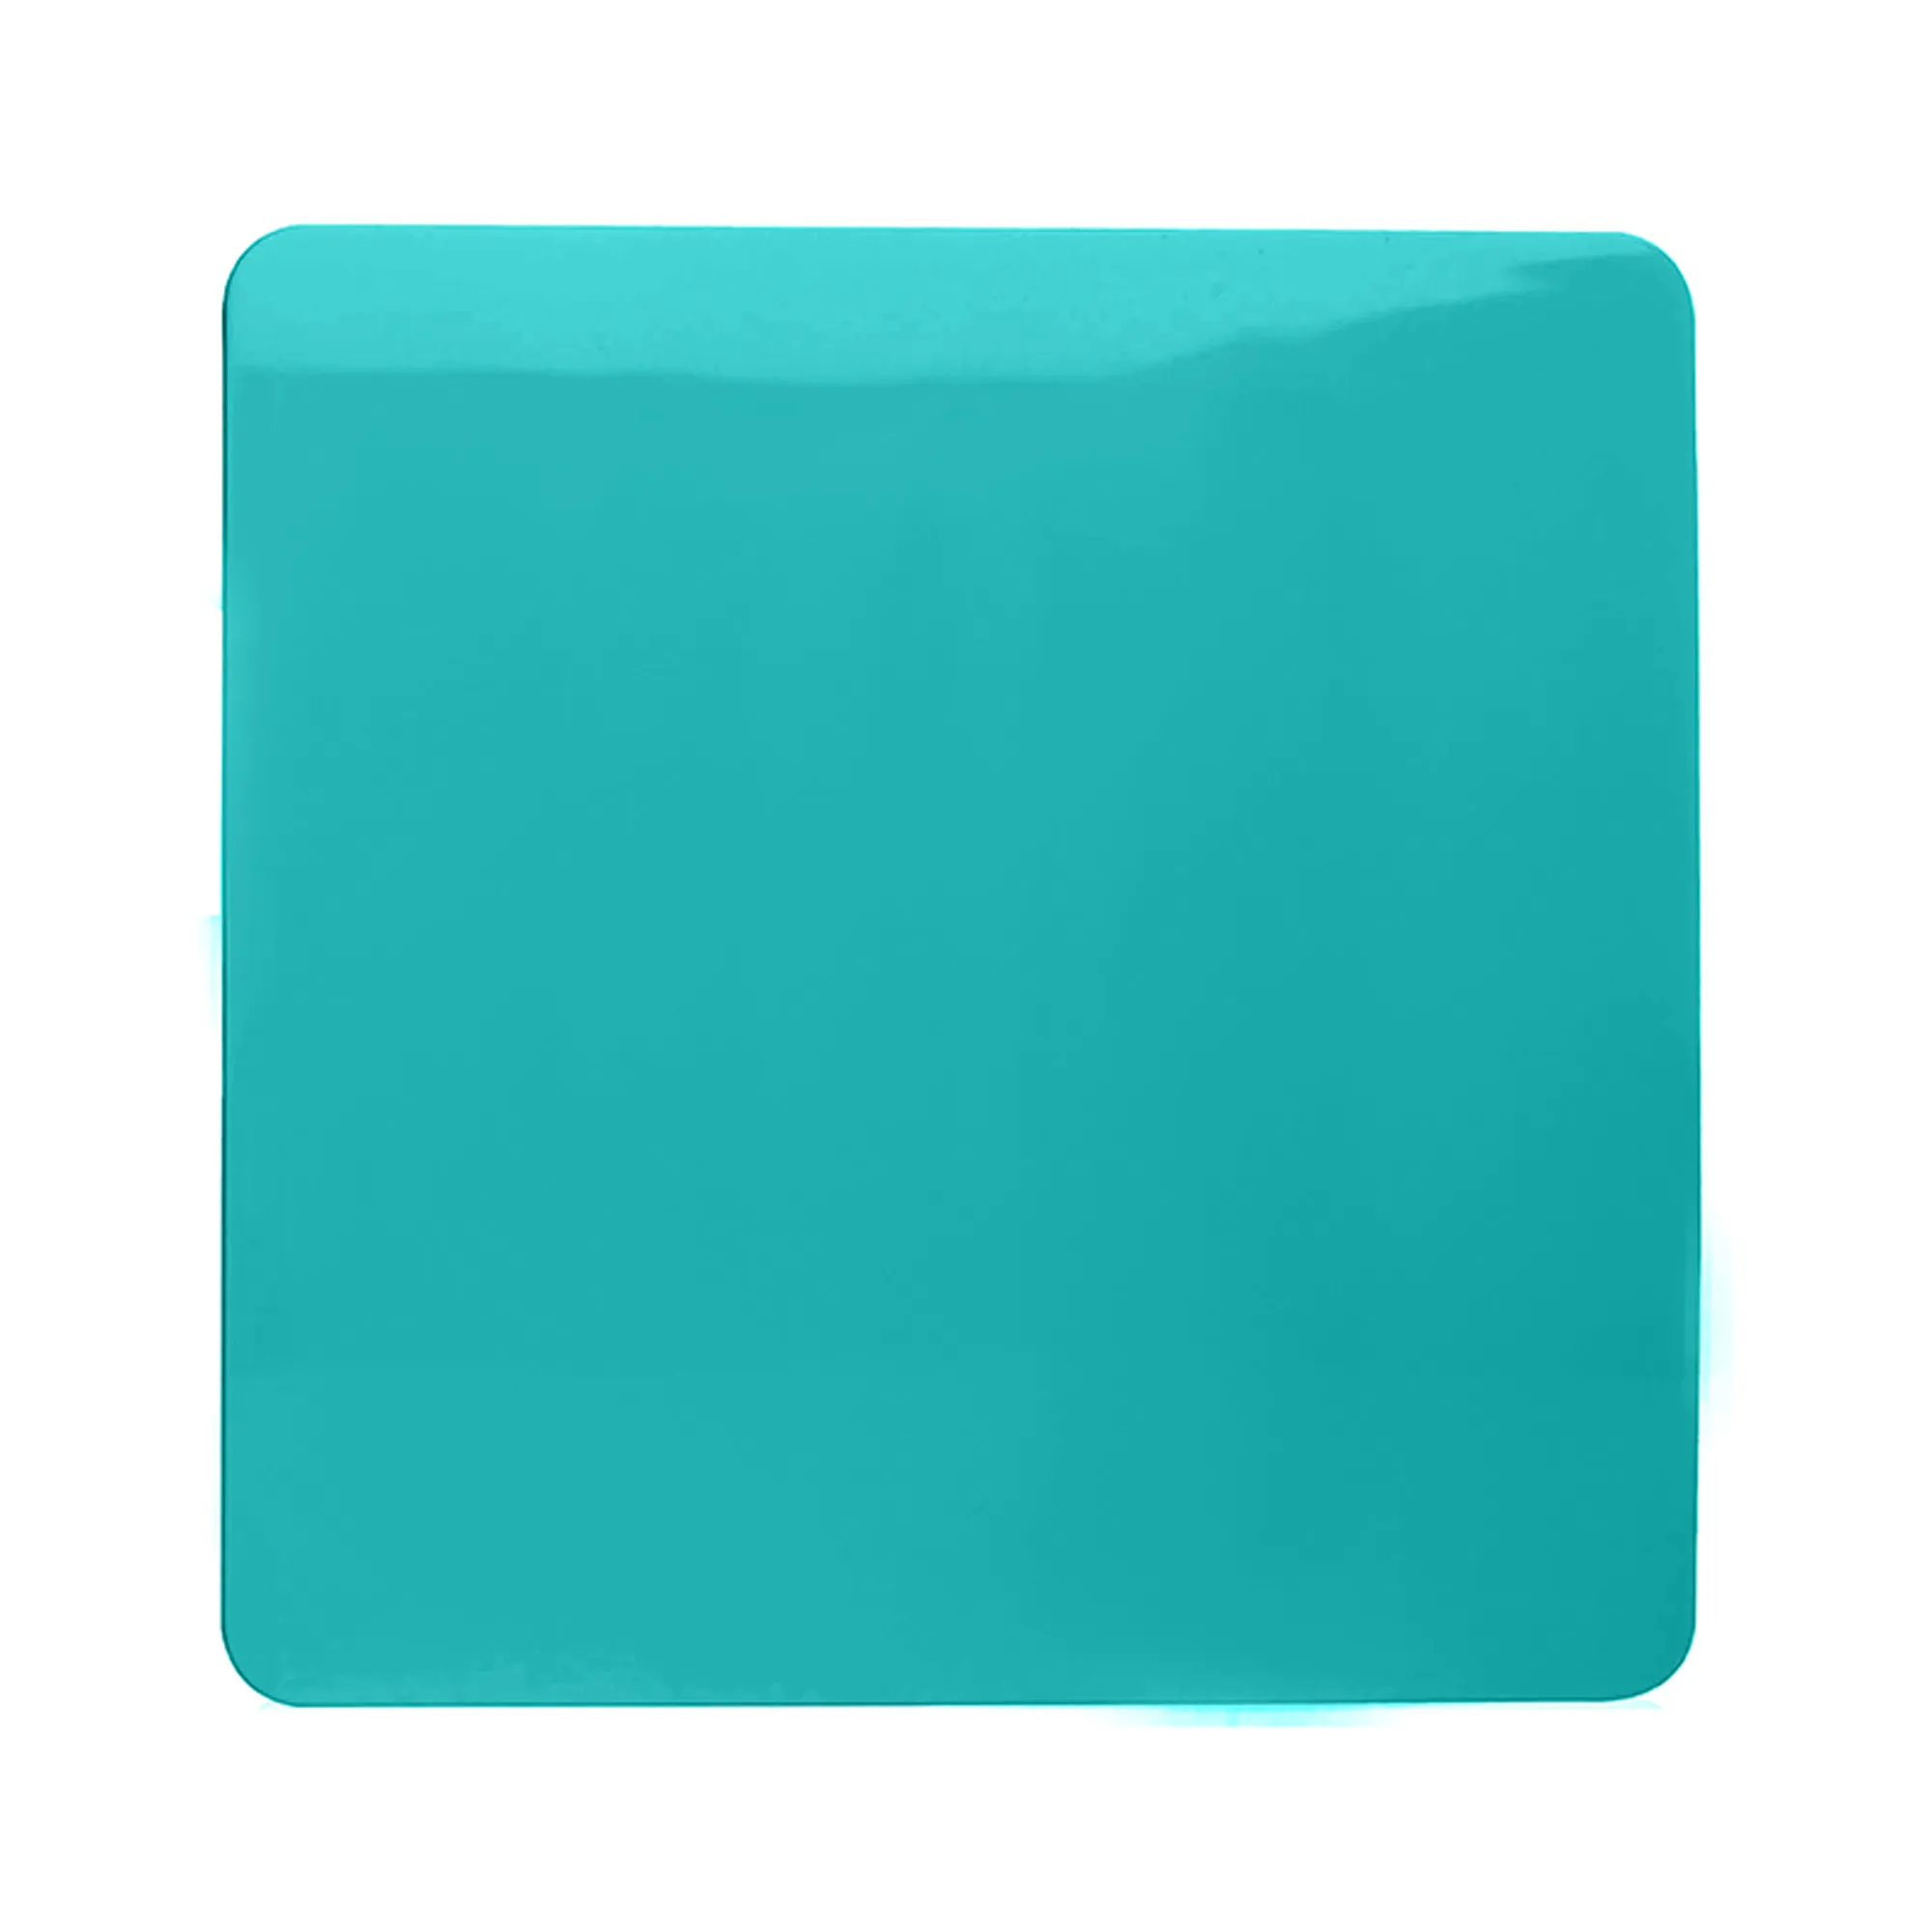 1 Gang Blanking Plate Bright Teal